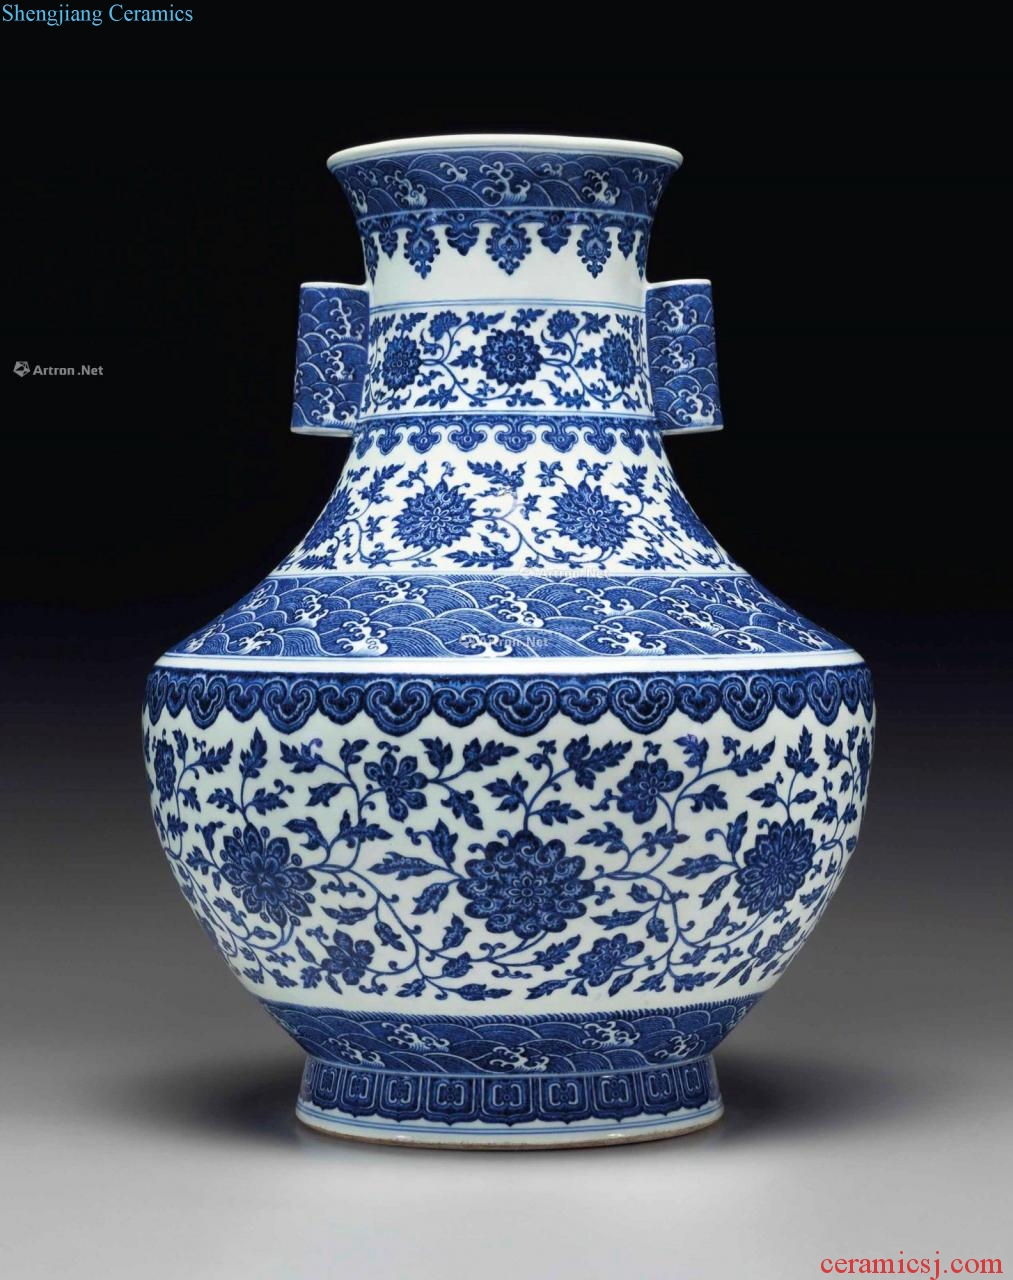 Emperor qianlong (1736-1795), A LARGE BLUE AND WHITE HU - FORM the VASE